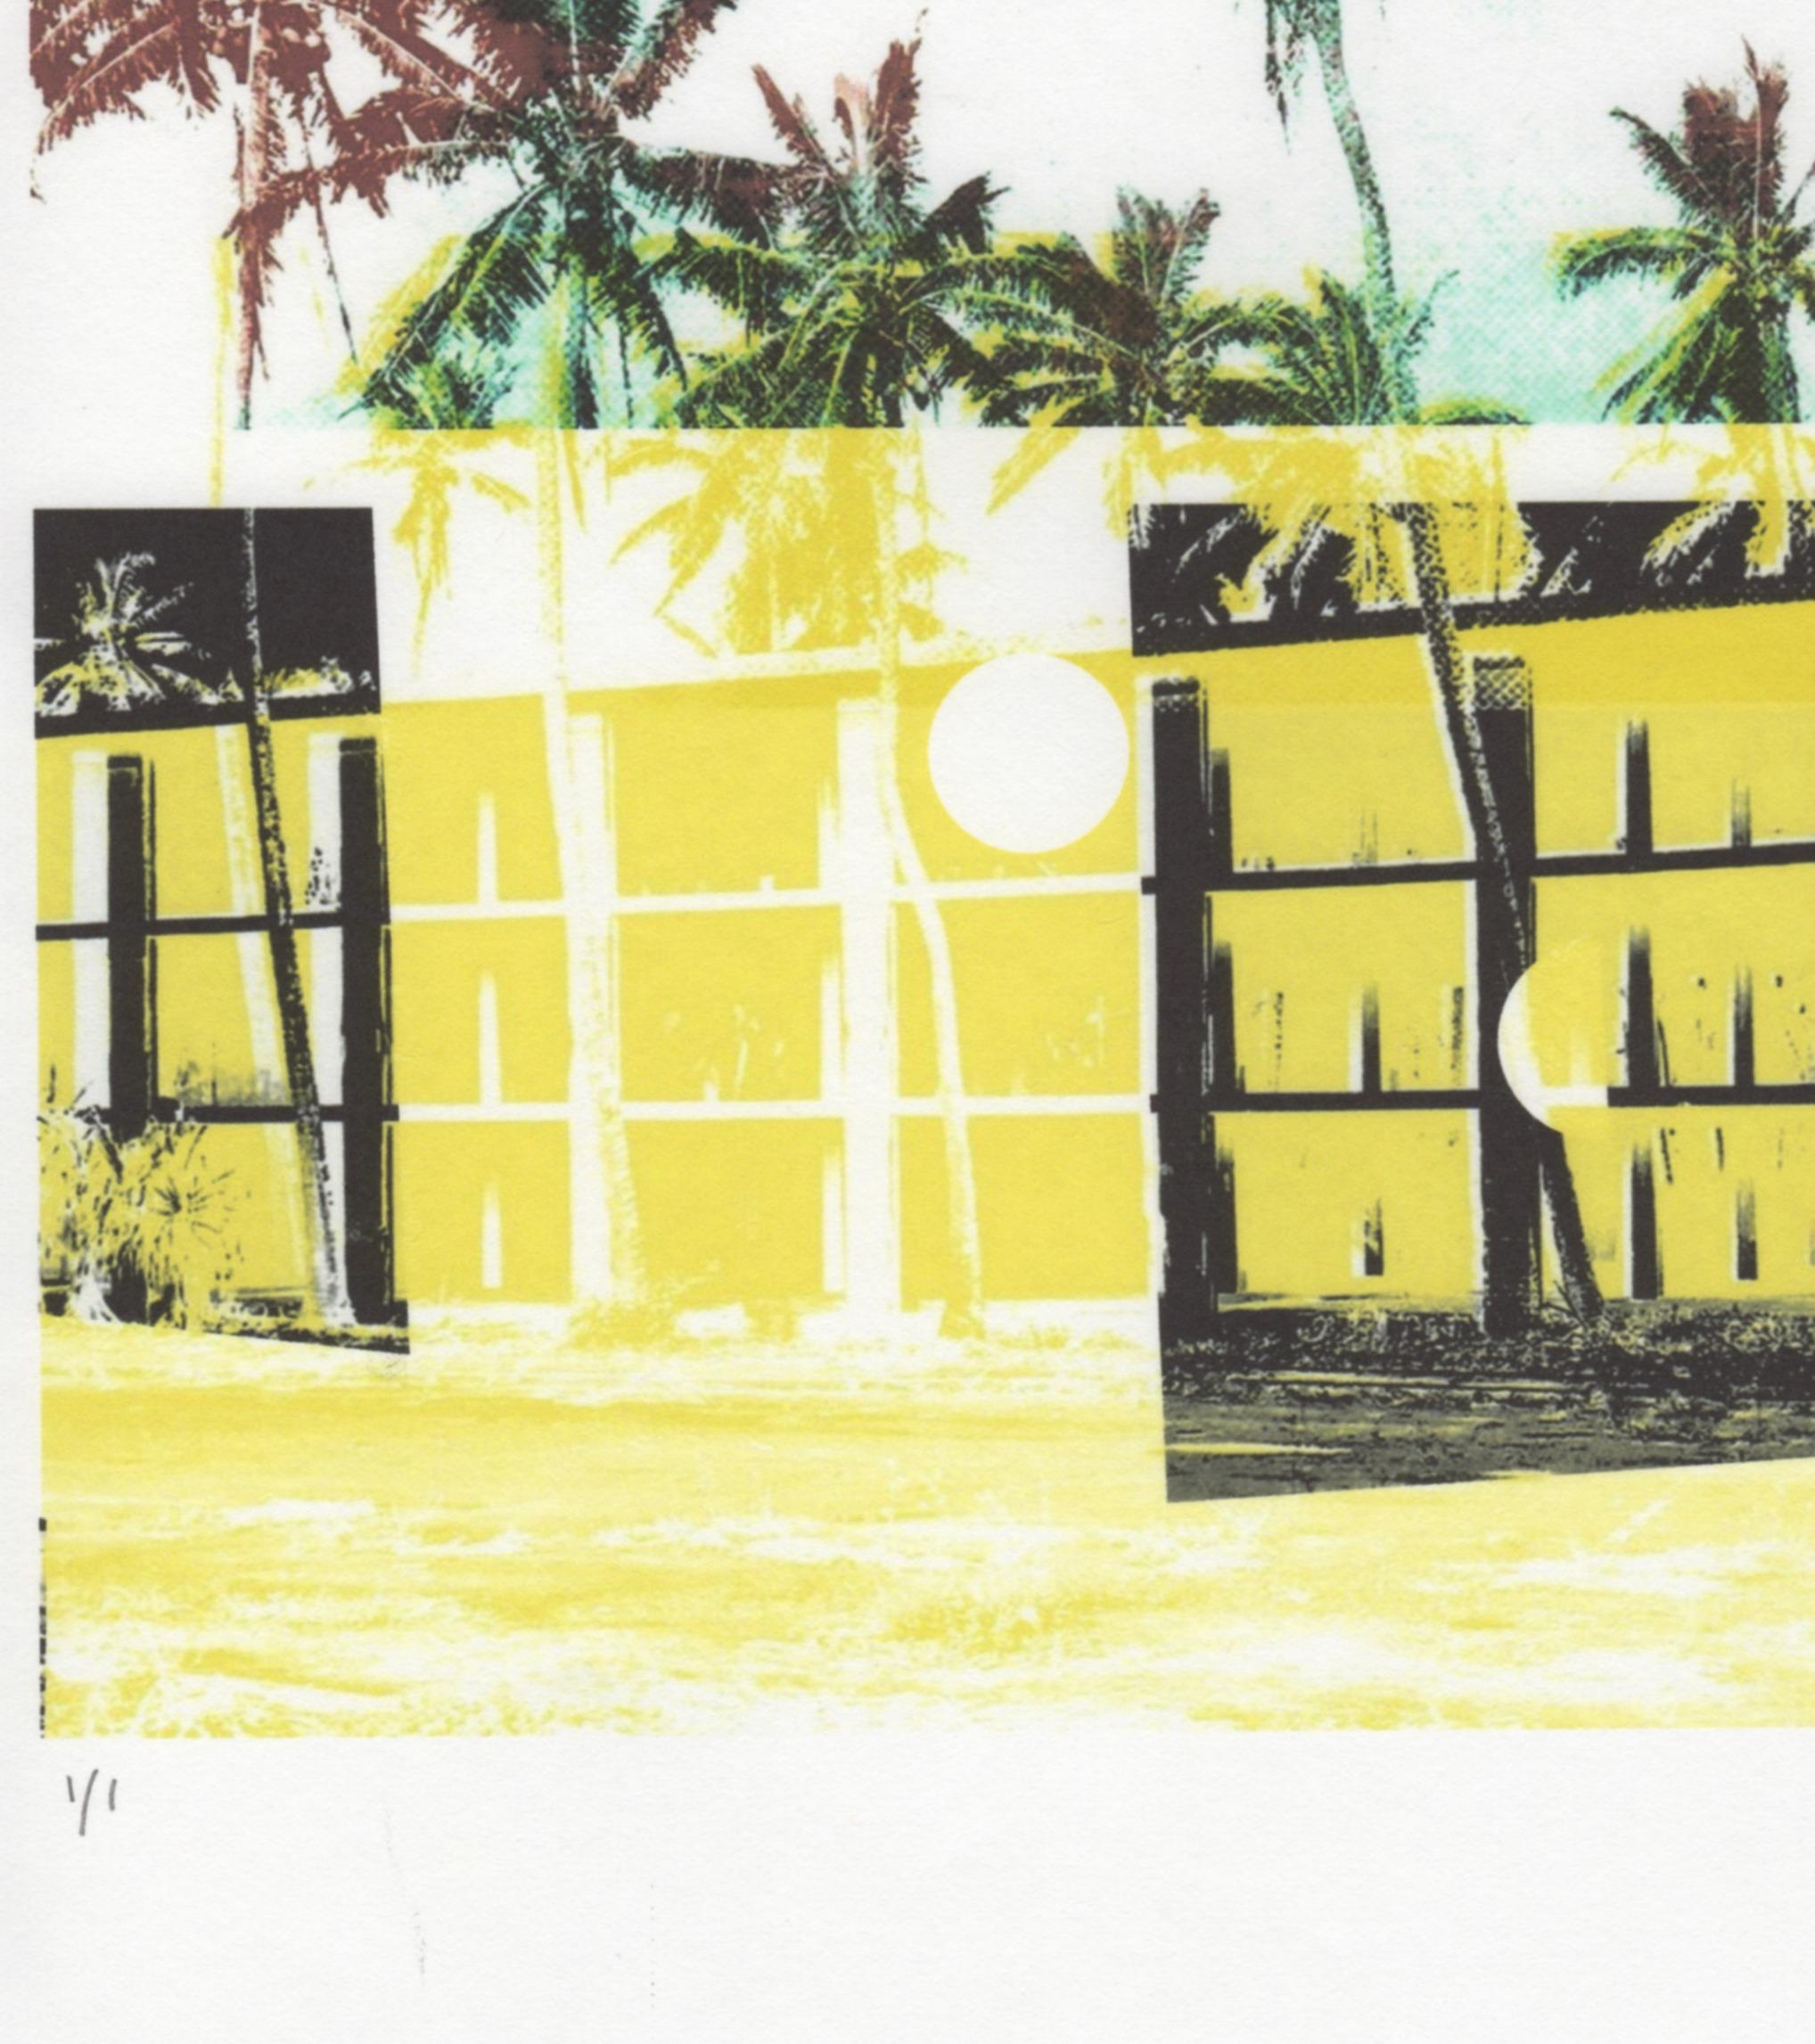 Cropped and double exposed images of palm trees, ocean views, Hawaiian Island scenery, and the facade of an abandoned Hawaiian hotel are represented on 14 x 11 inch Awagami Kozo Japanese paper in Patty deGrandpre’s contemporary abstract monoprint